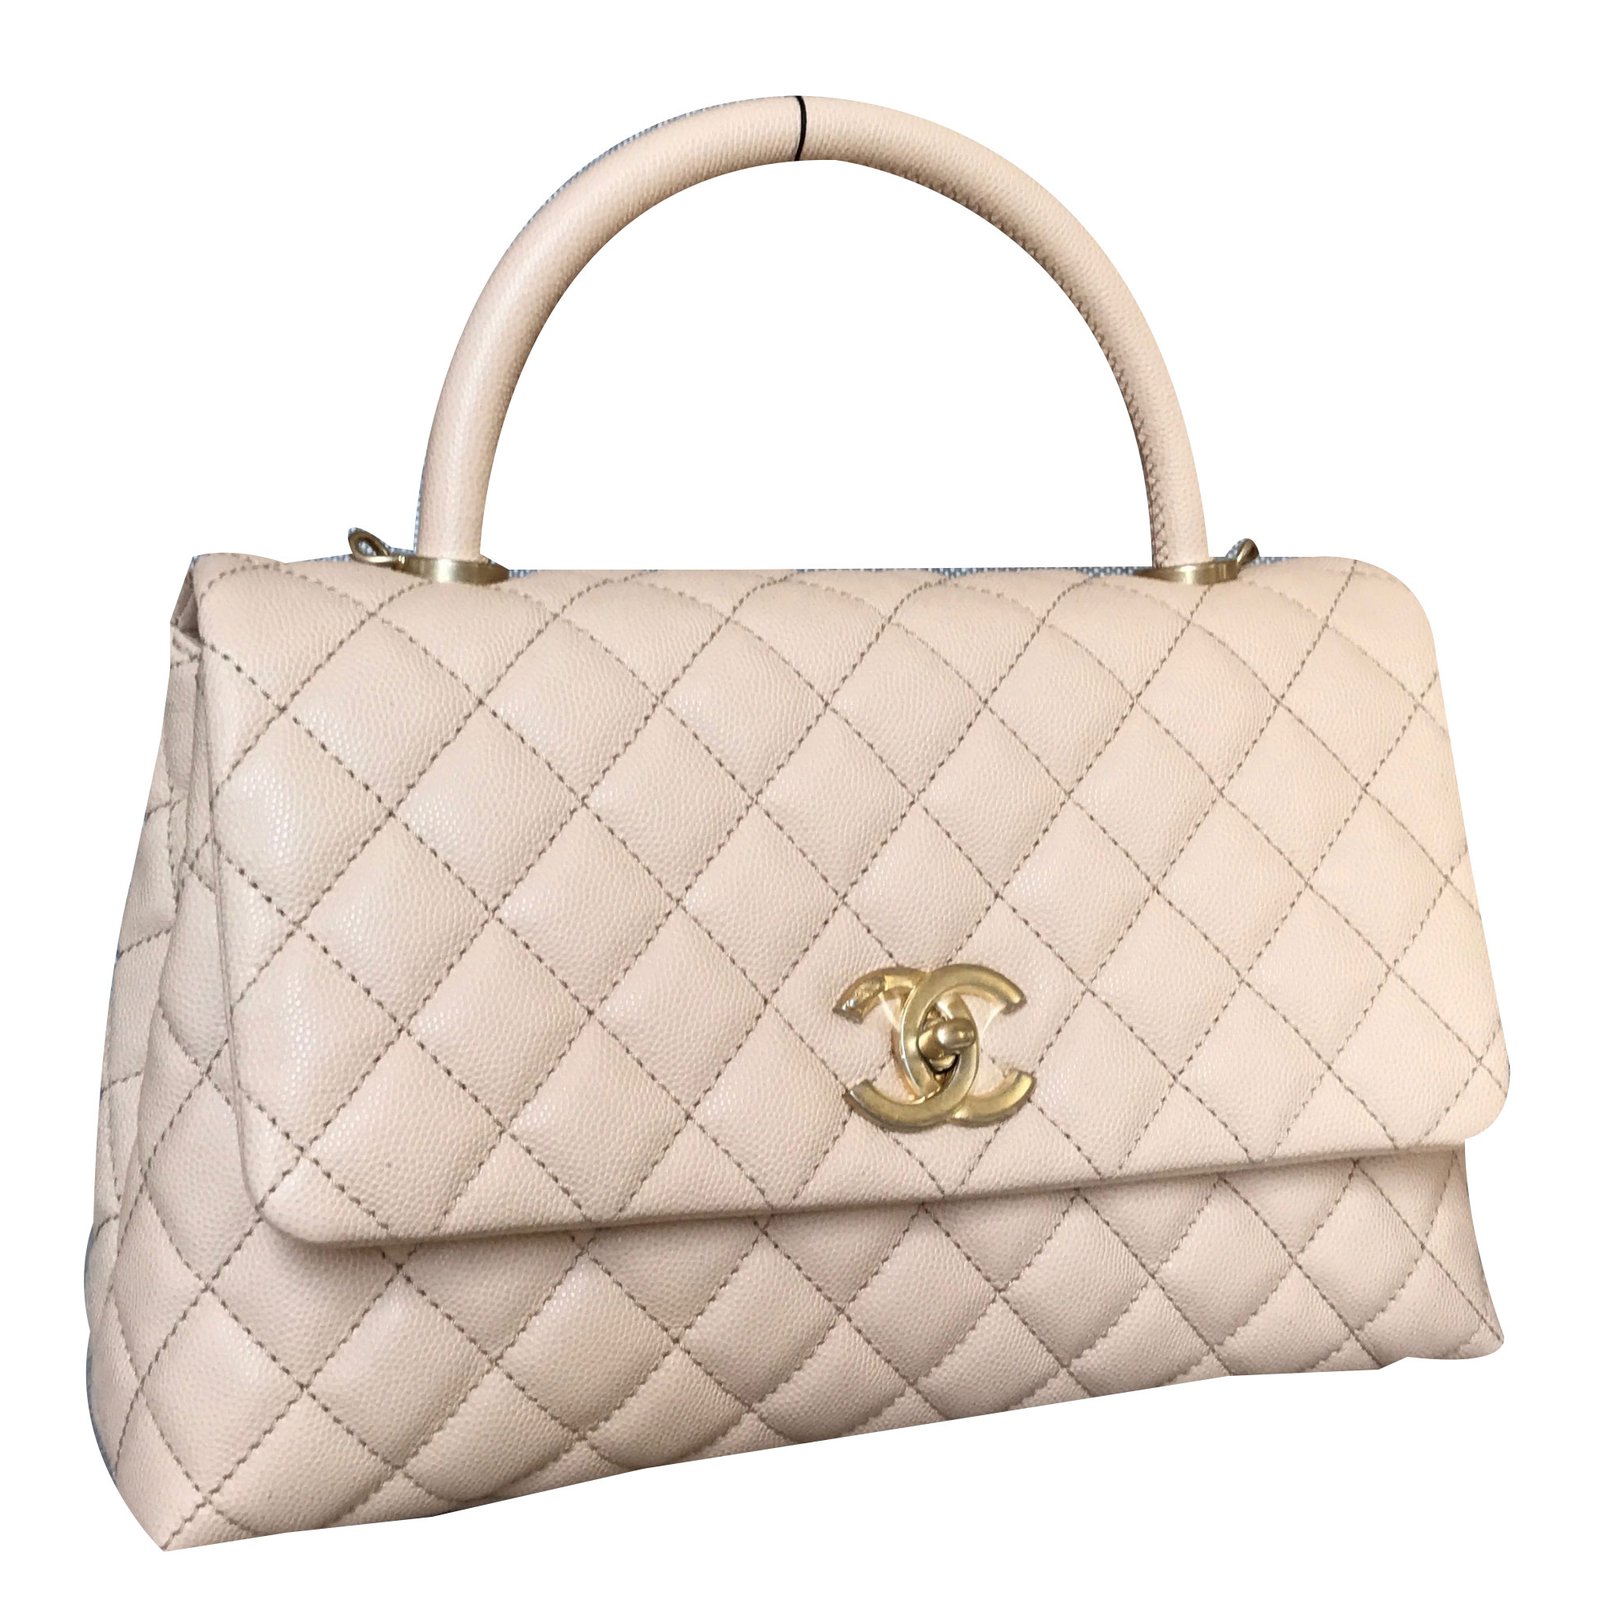 Chanel Coco Handle Handbag Prices | Confederated Tribes of the Umatilla Indian Reservation